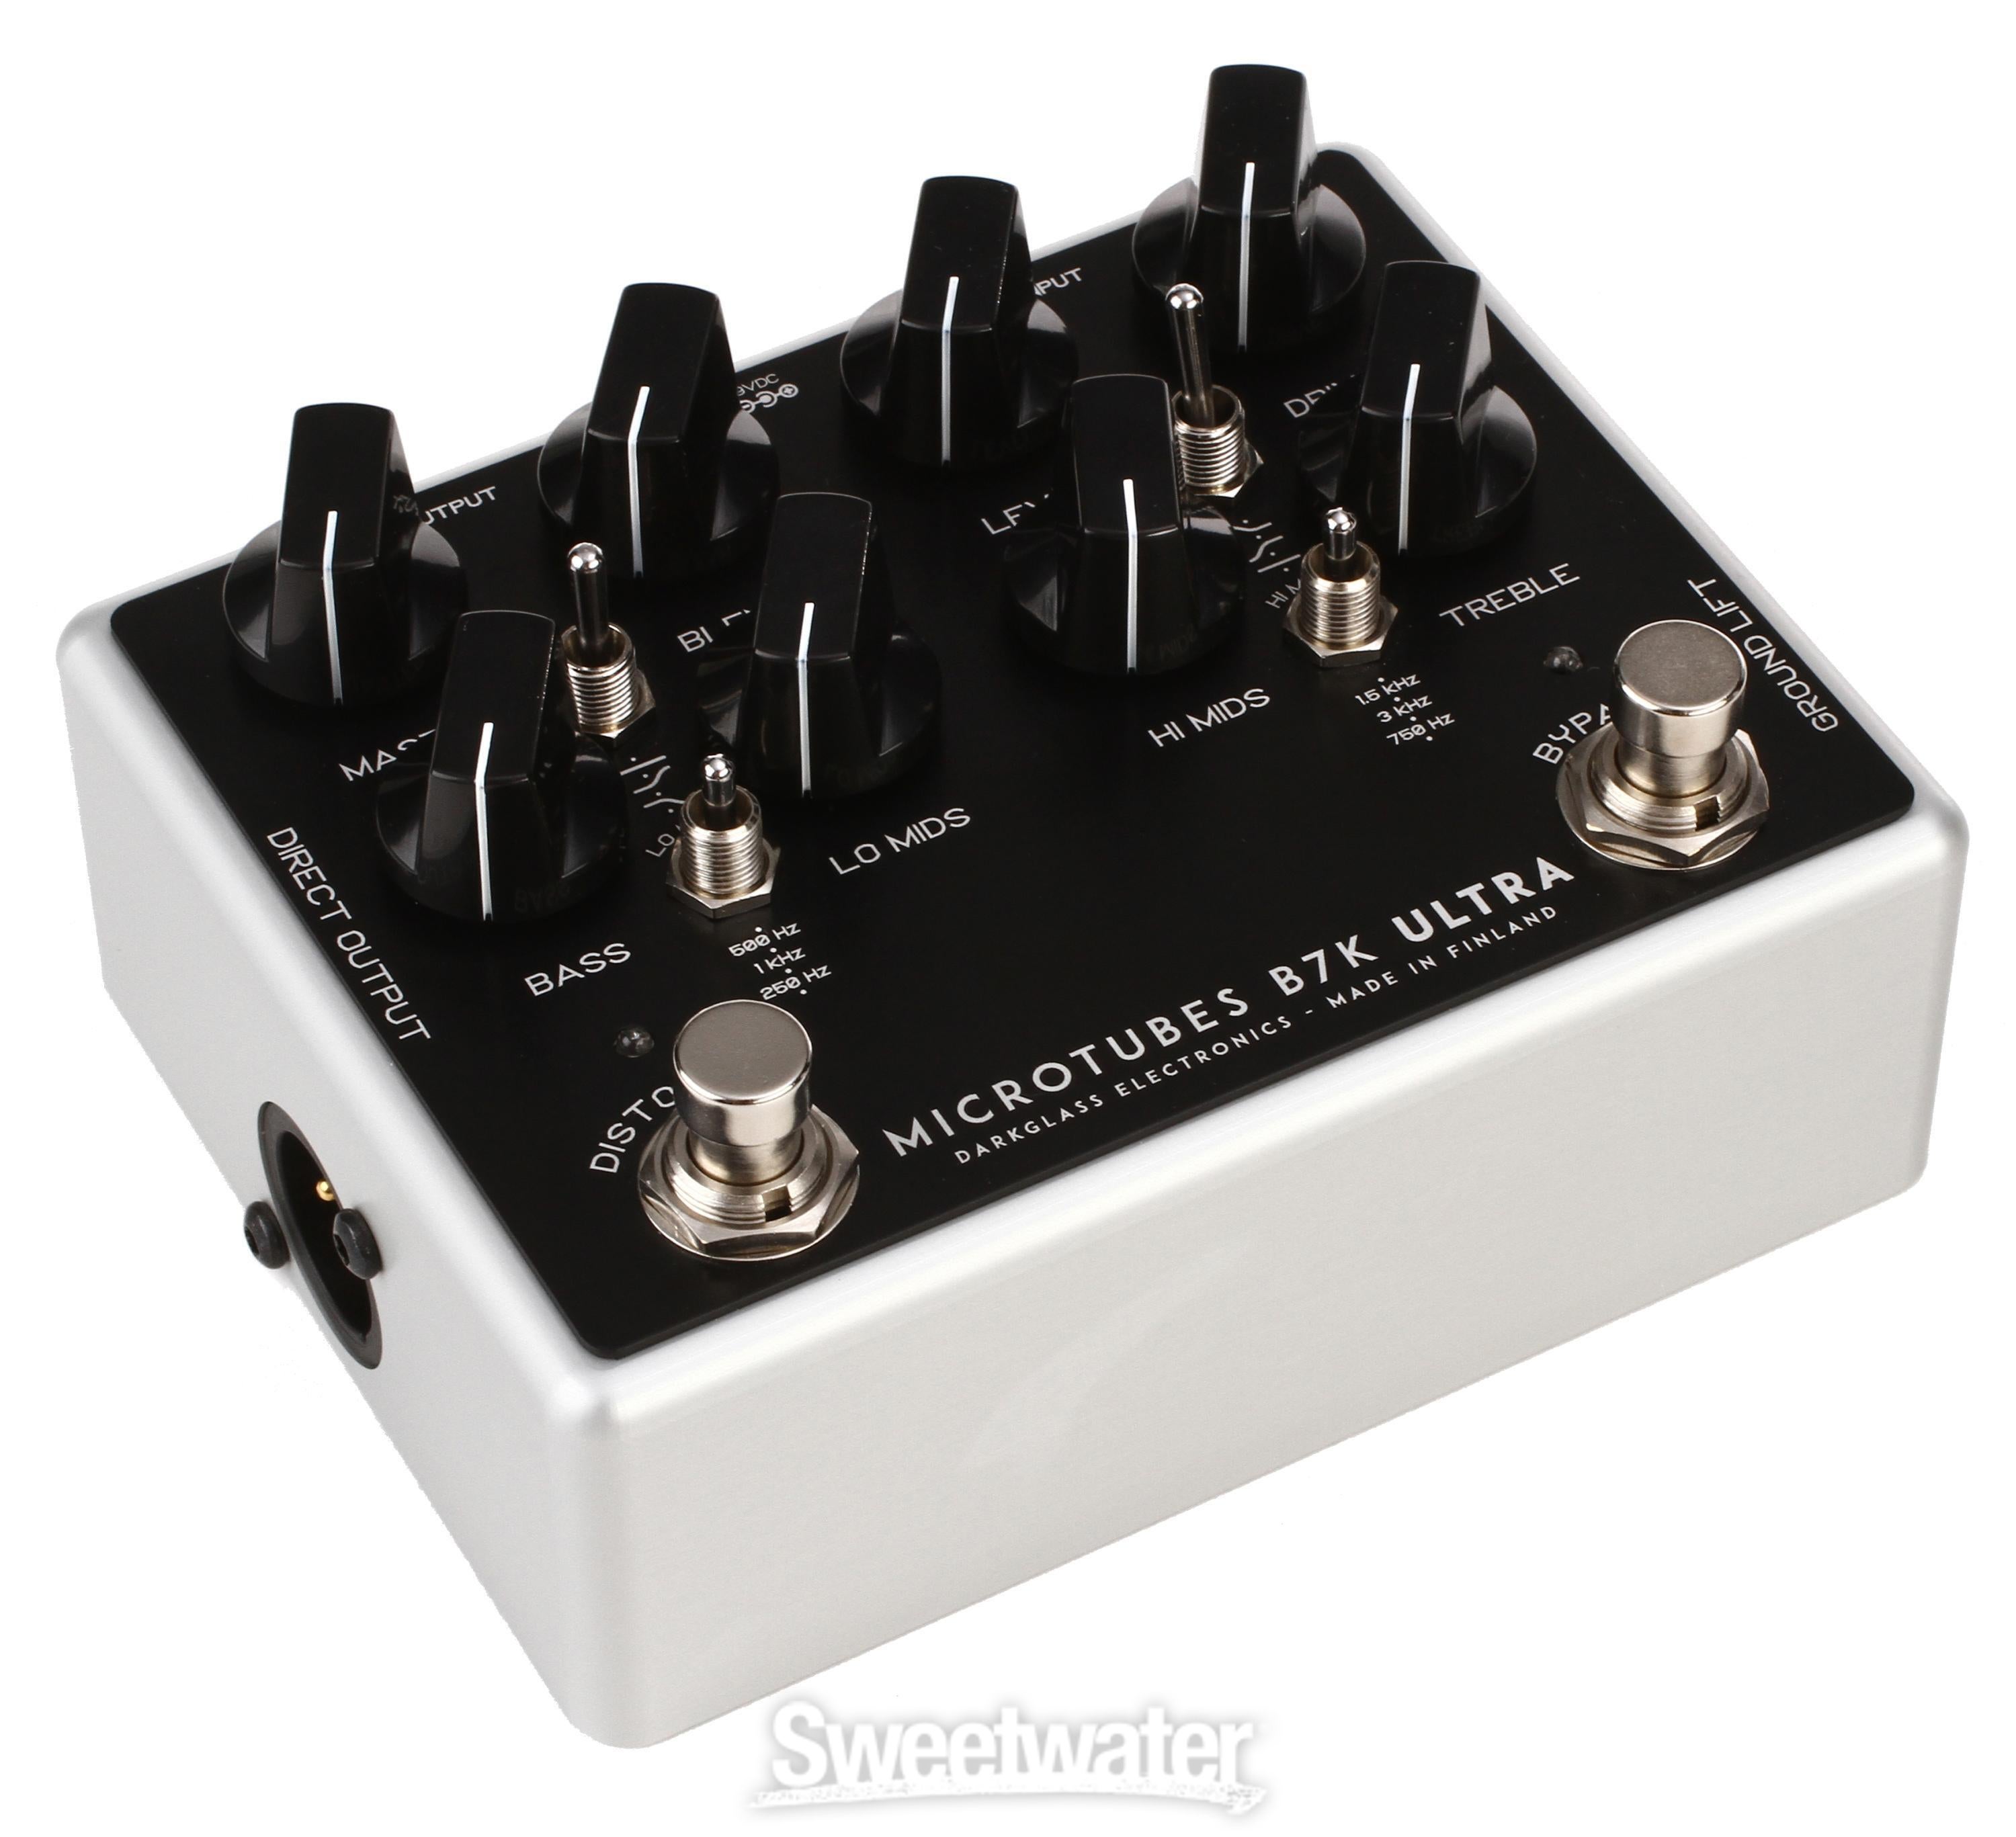 Darkglass Microtubes B7K Ultra Bass Preamp Pedal | Sweetwater